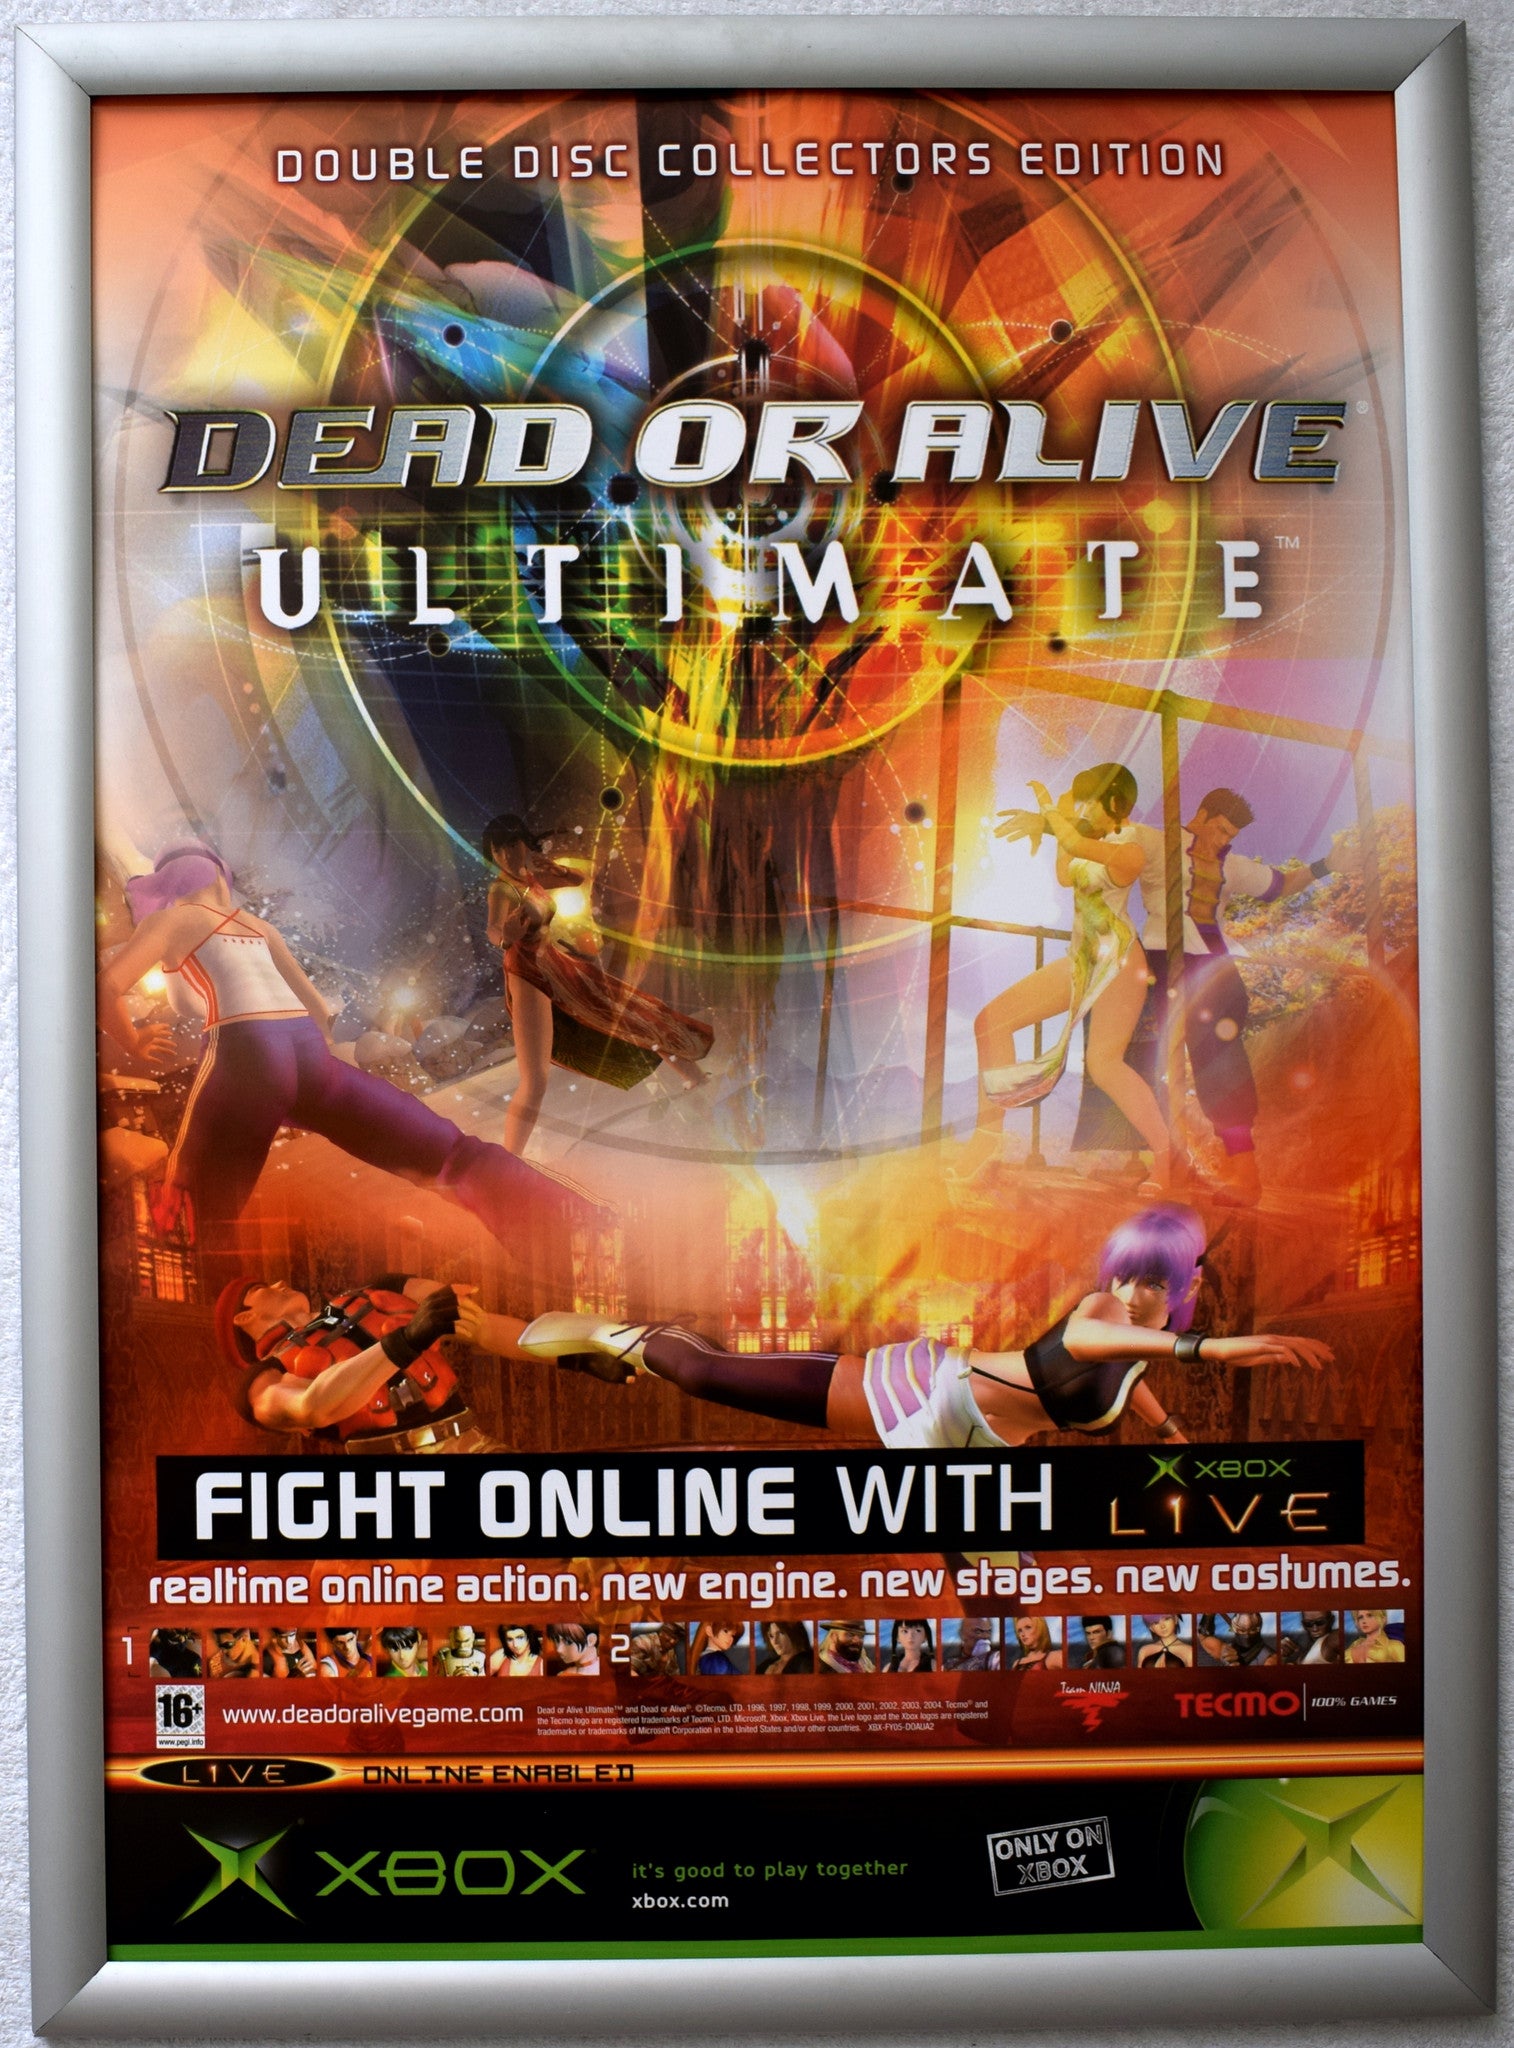 Dead or Alive Ultimate (A2) Promotional Poster